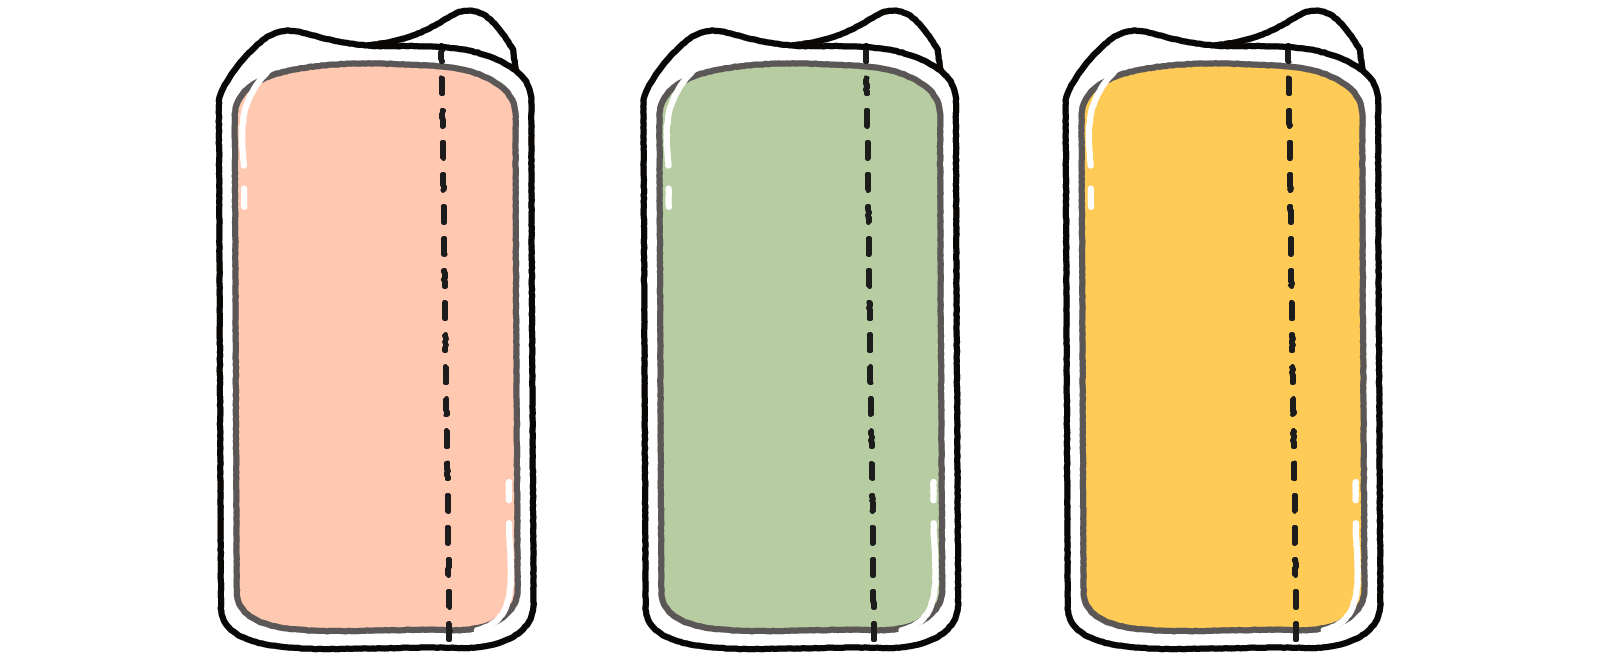 Illustration of different color Nugget couches wrapped inside of a plastic 'burrito'